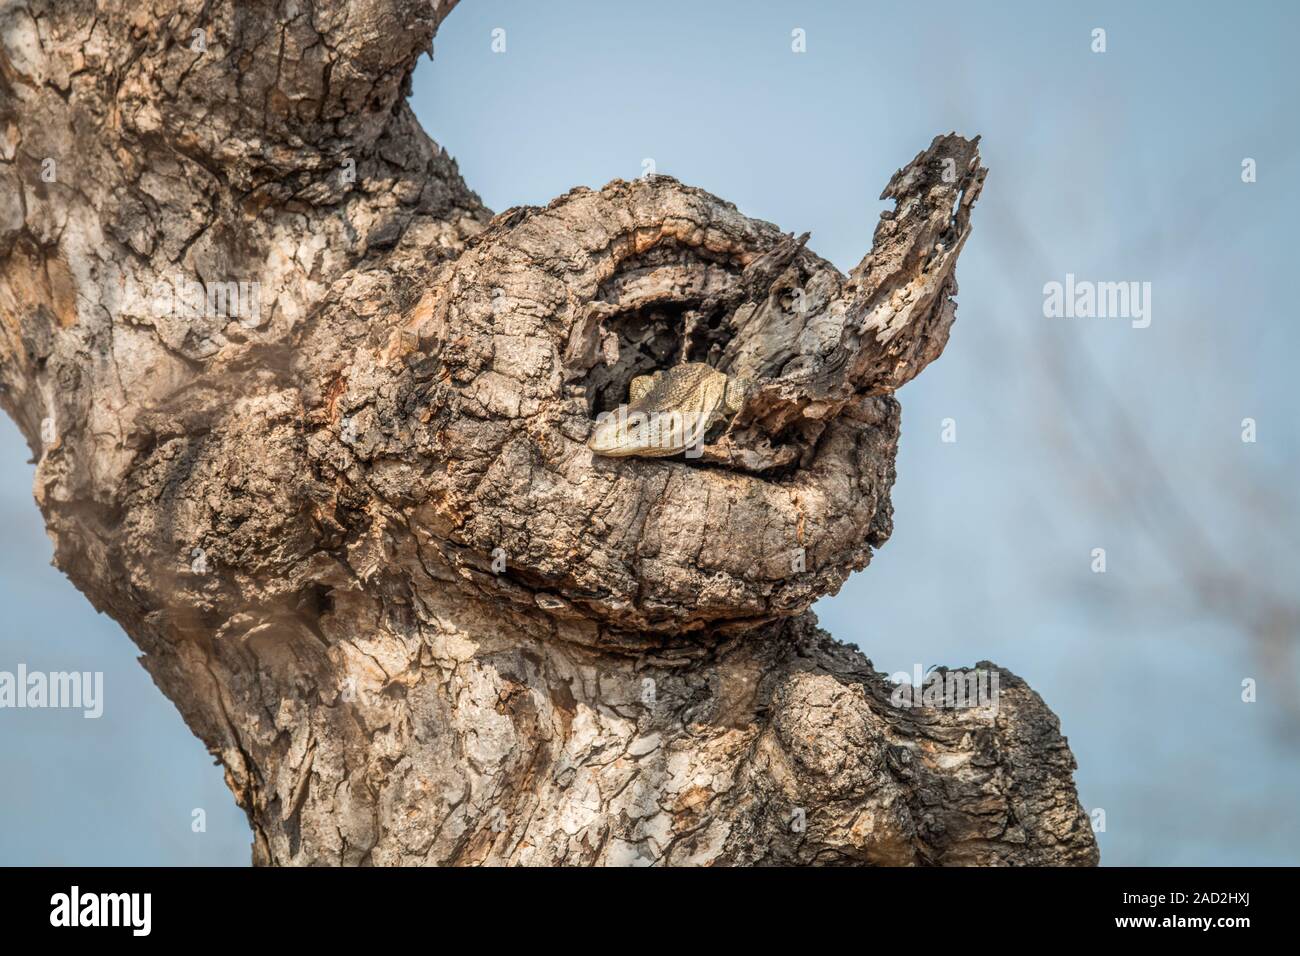 Rock monitor in a tree. Stock Photo